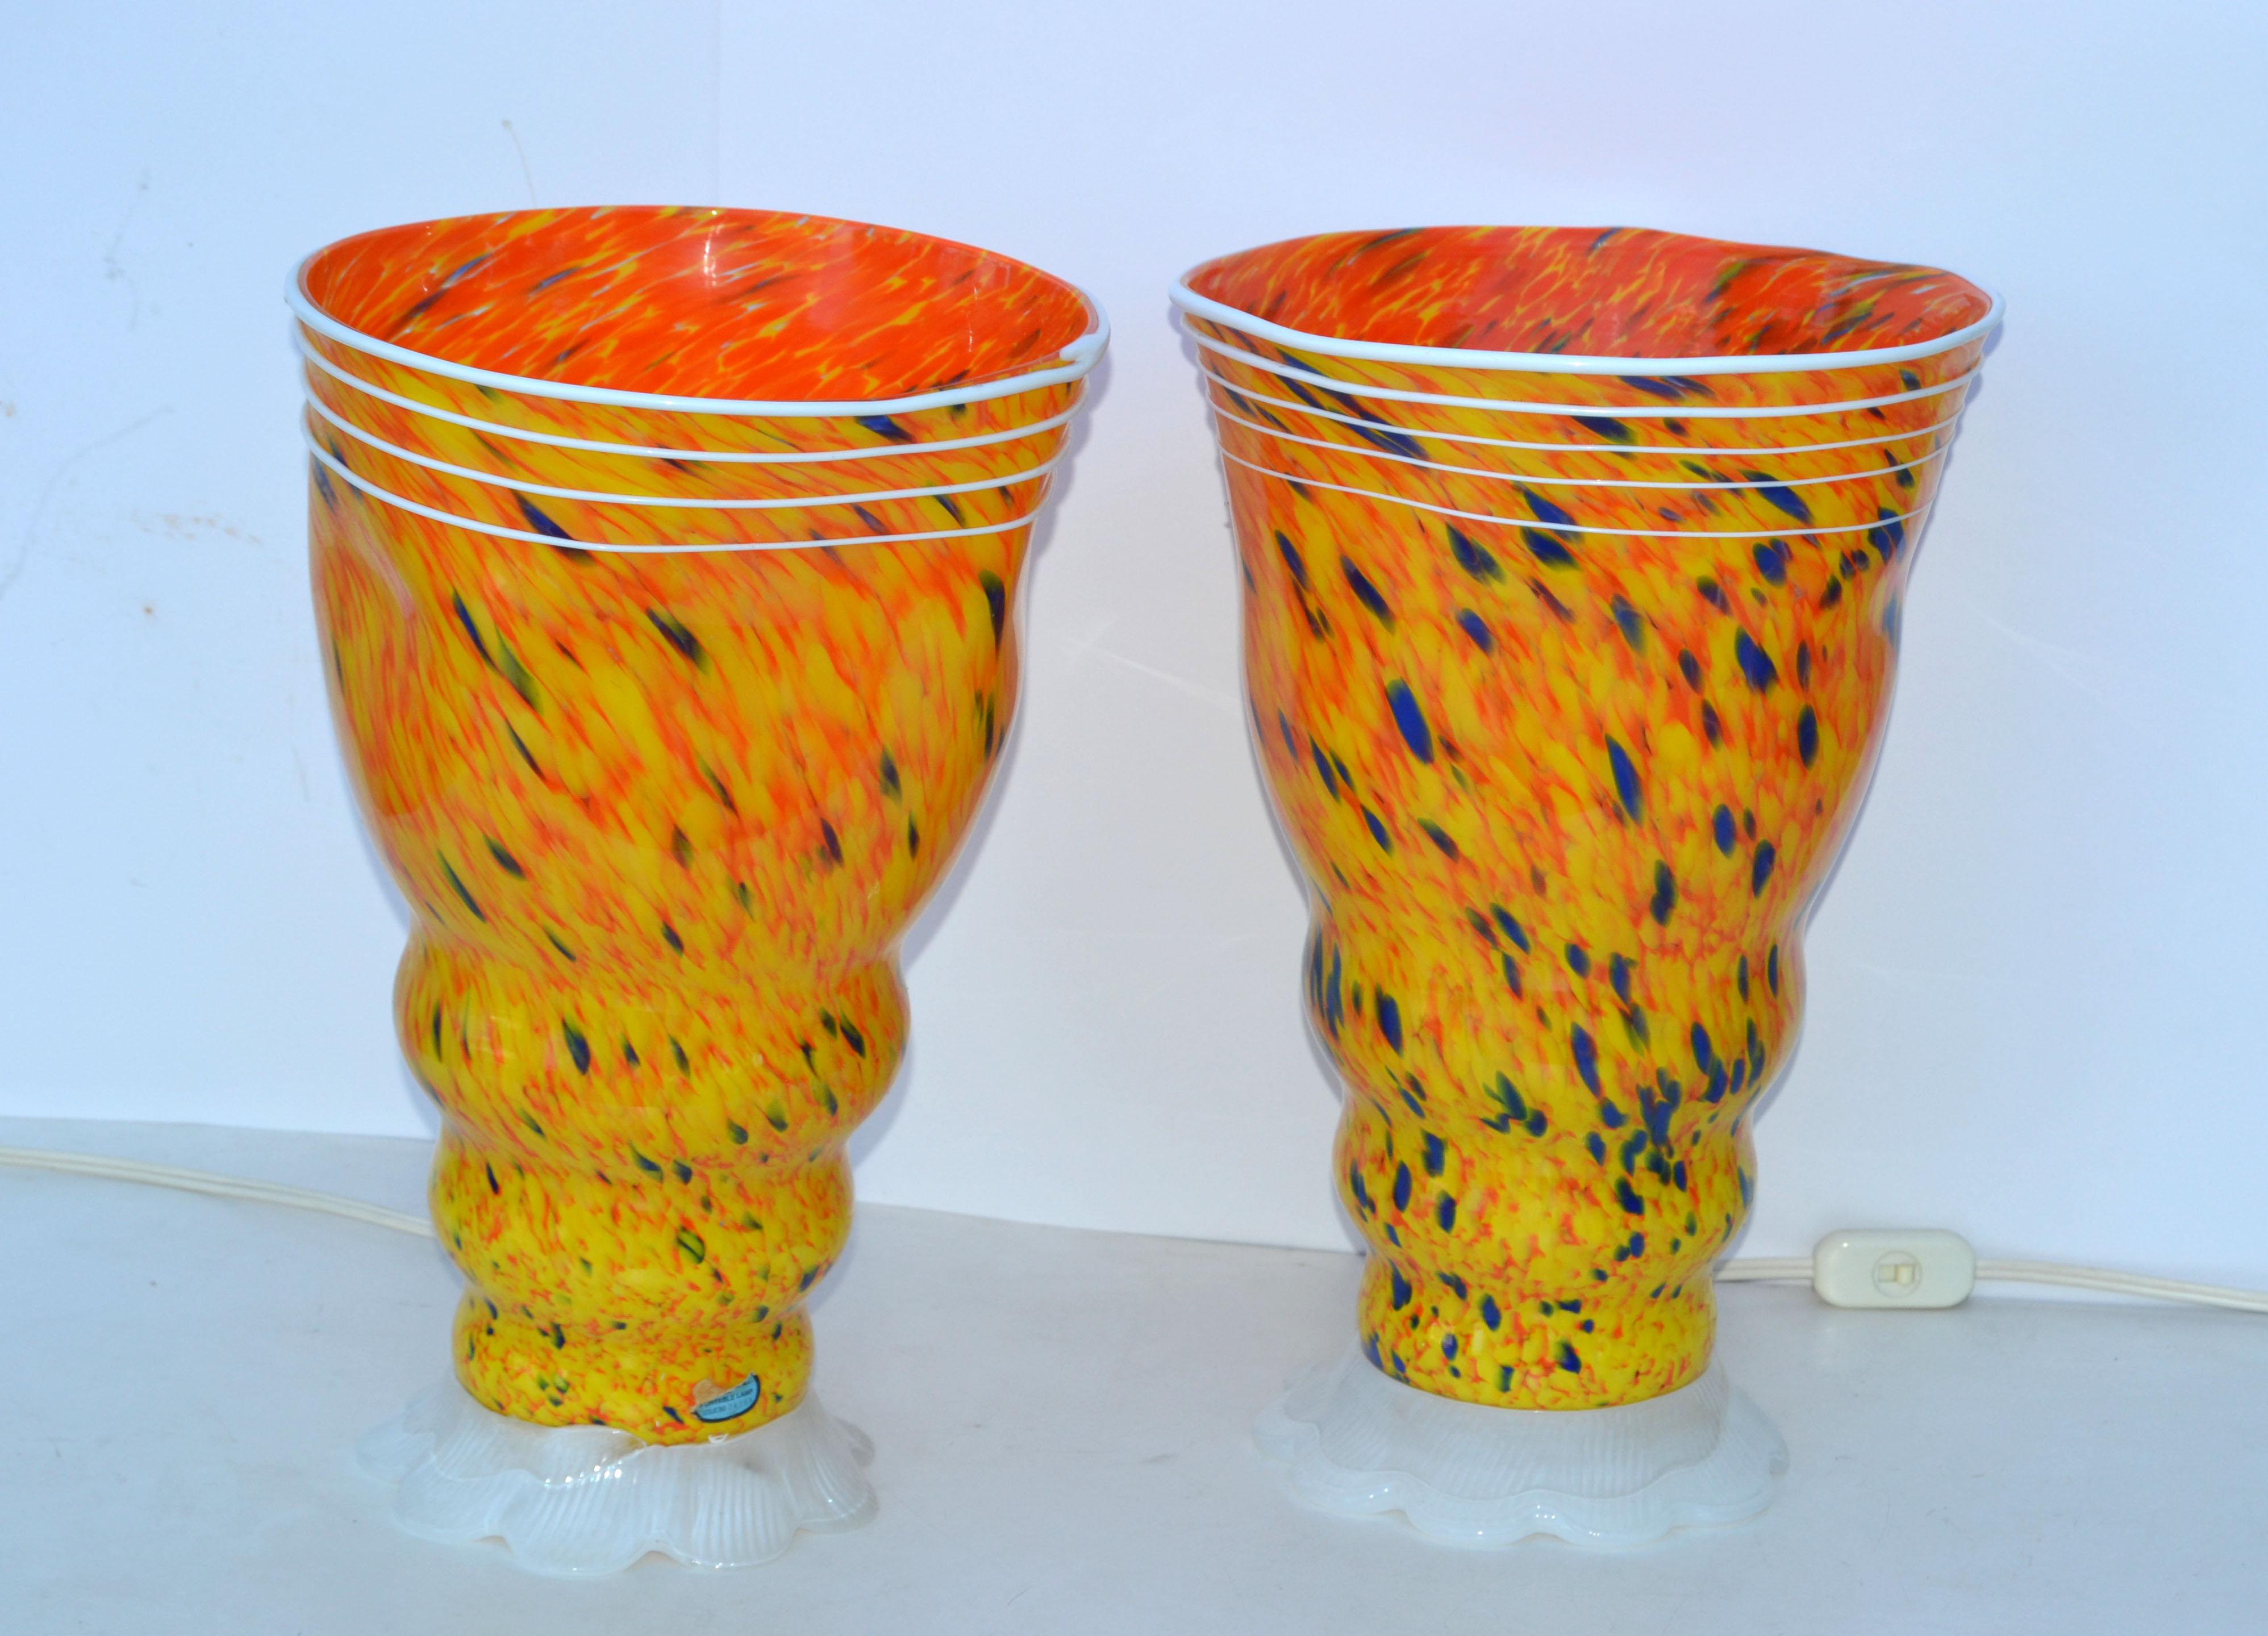 Superb pair of free-form blown Murano glass table lamp in Hues of yellow, orange, blue & white by Barovier & Toso, made in Italy in the 1980.
US rewired, UL Listing and in working condition and each Lamp takes a regular or LED bulb.
Makers Foil